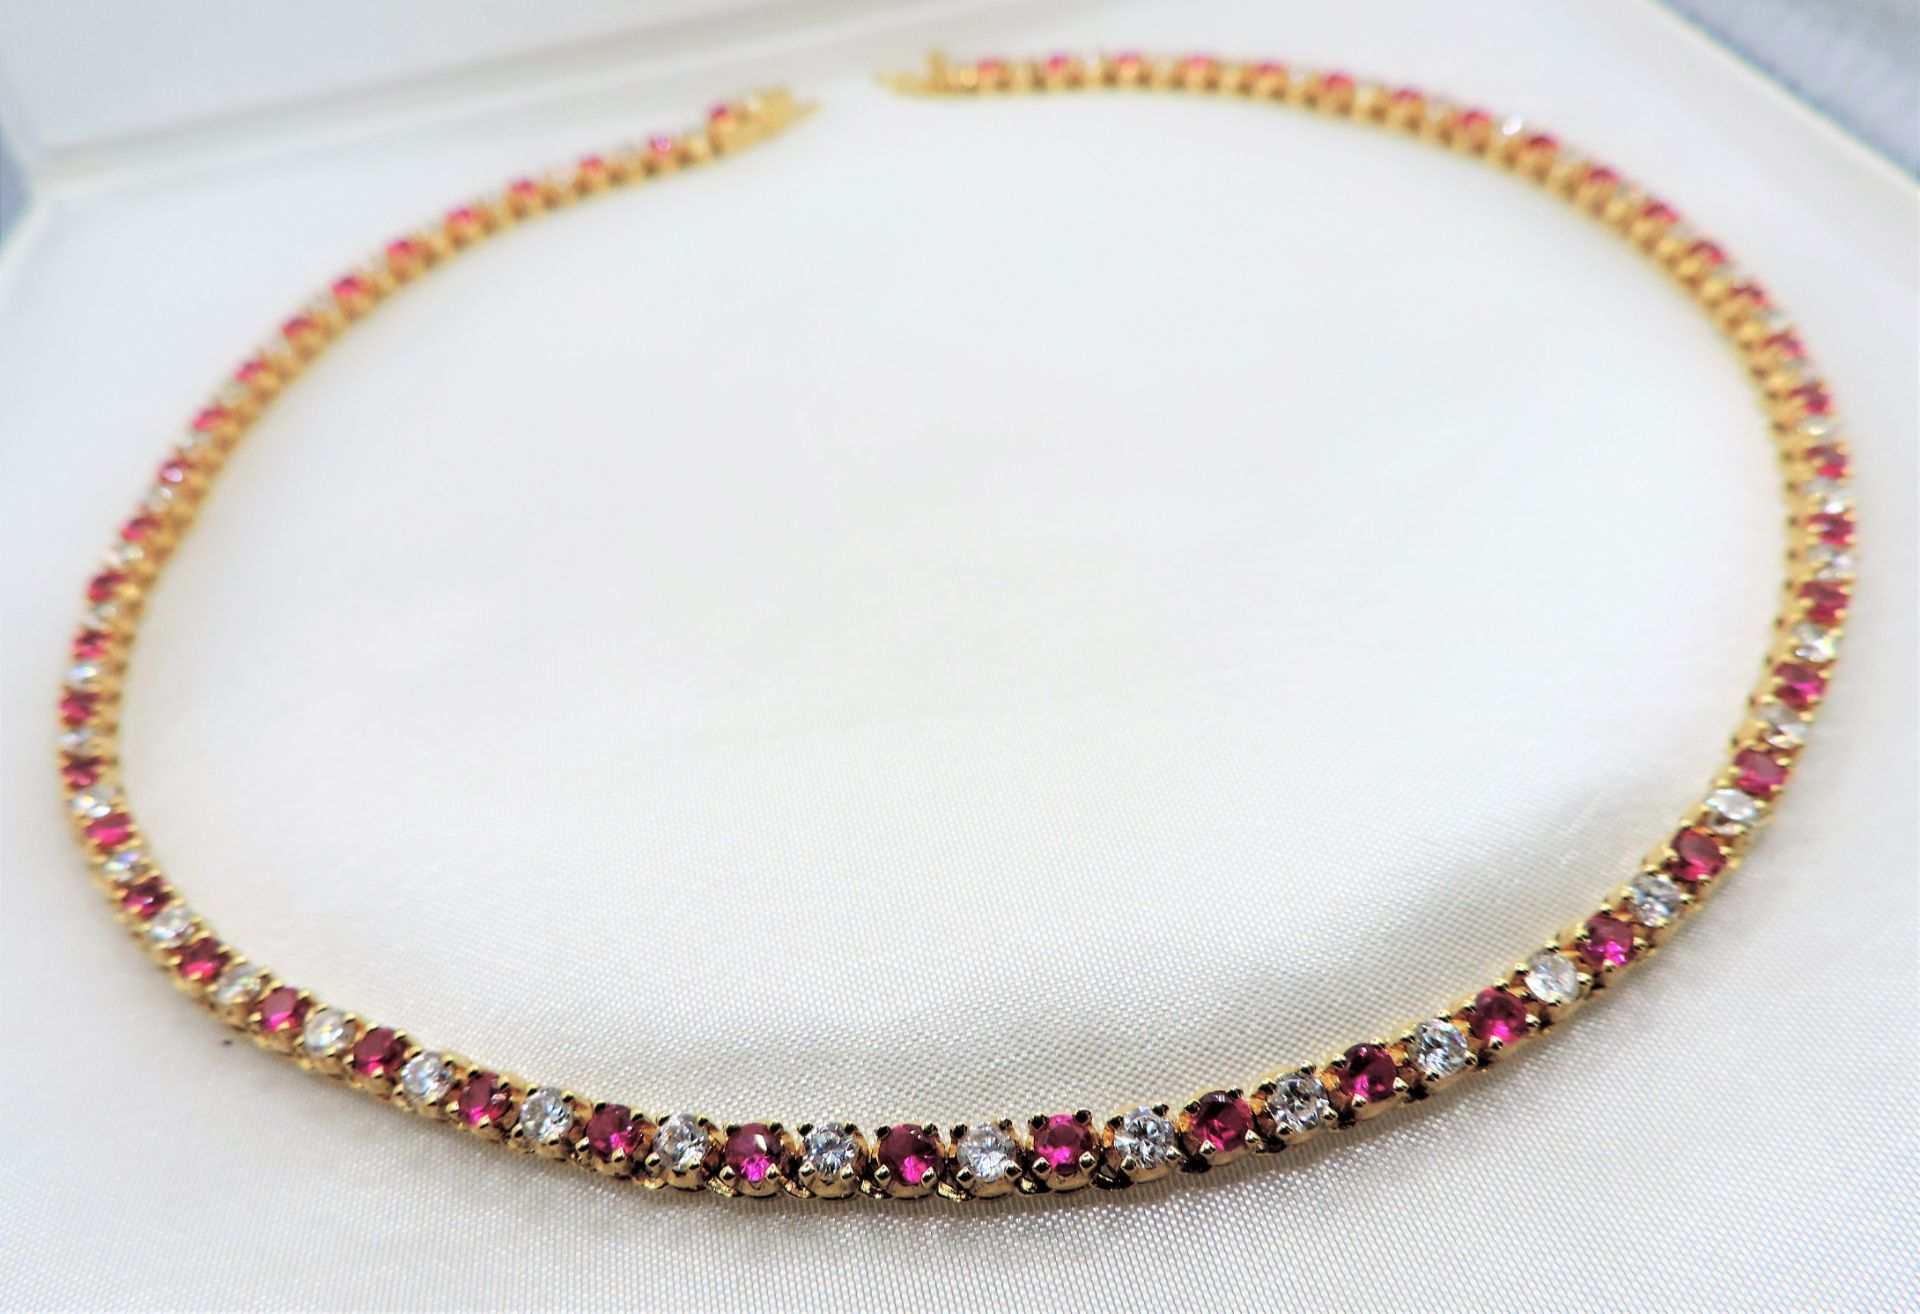 12 carat Gold on Sterling Silver Pink & White Tourmaline Tennis Necklace New with Gift Box - Image 3 of 4